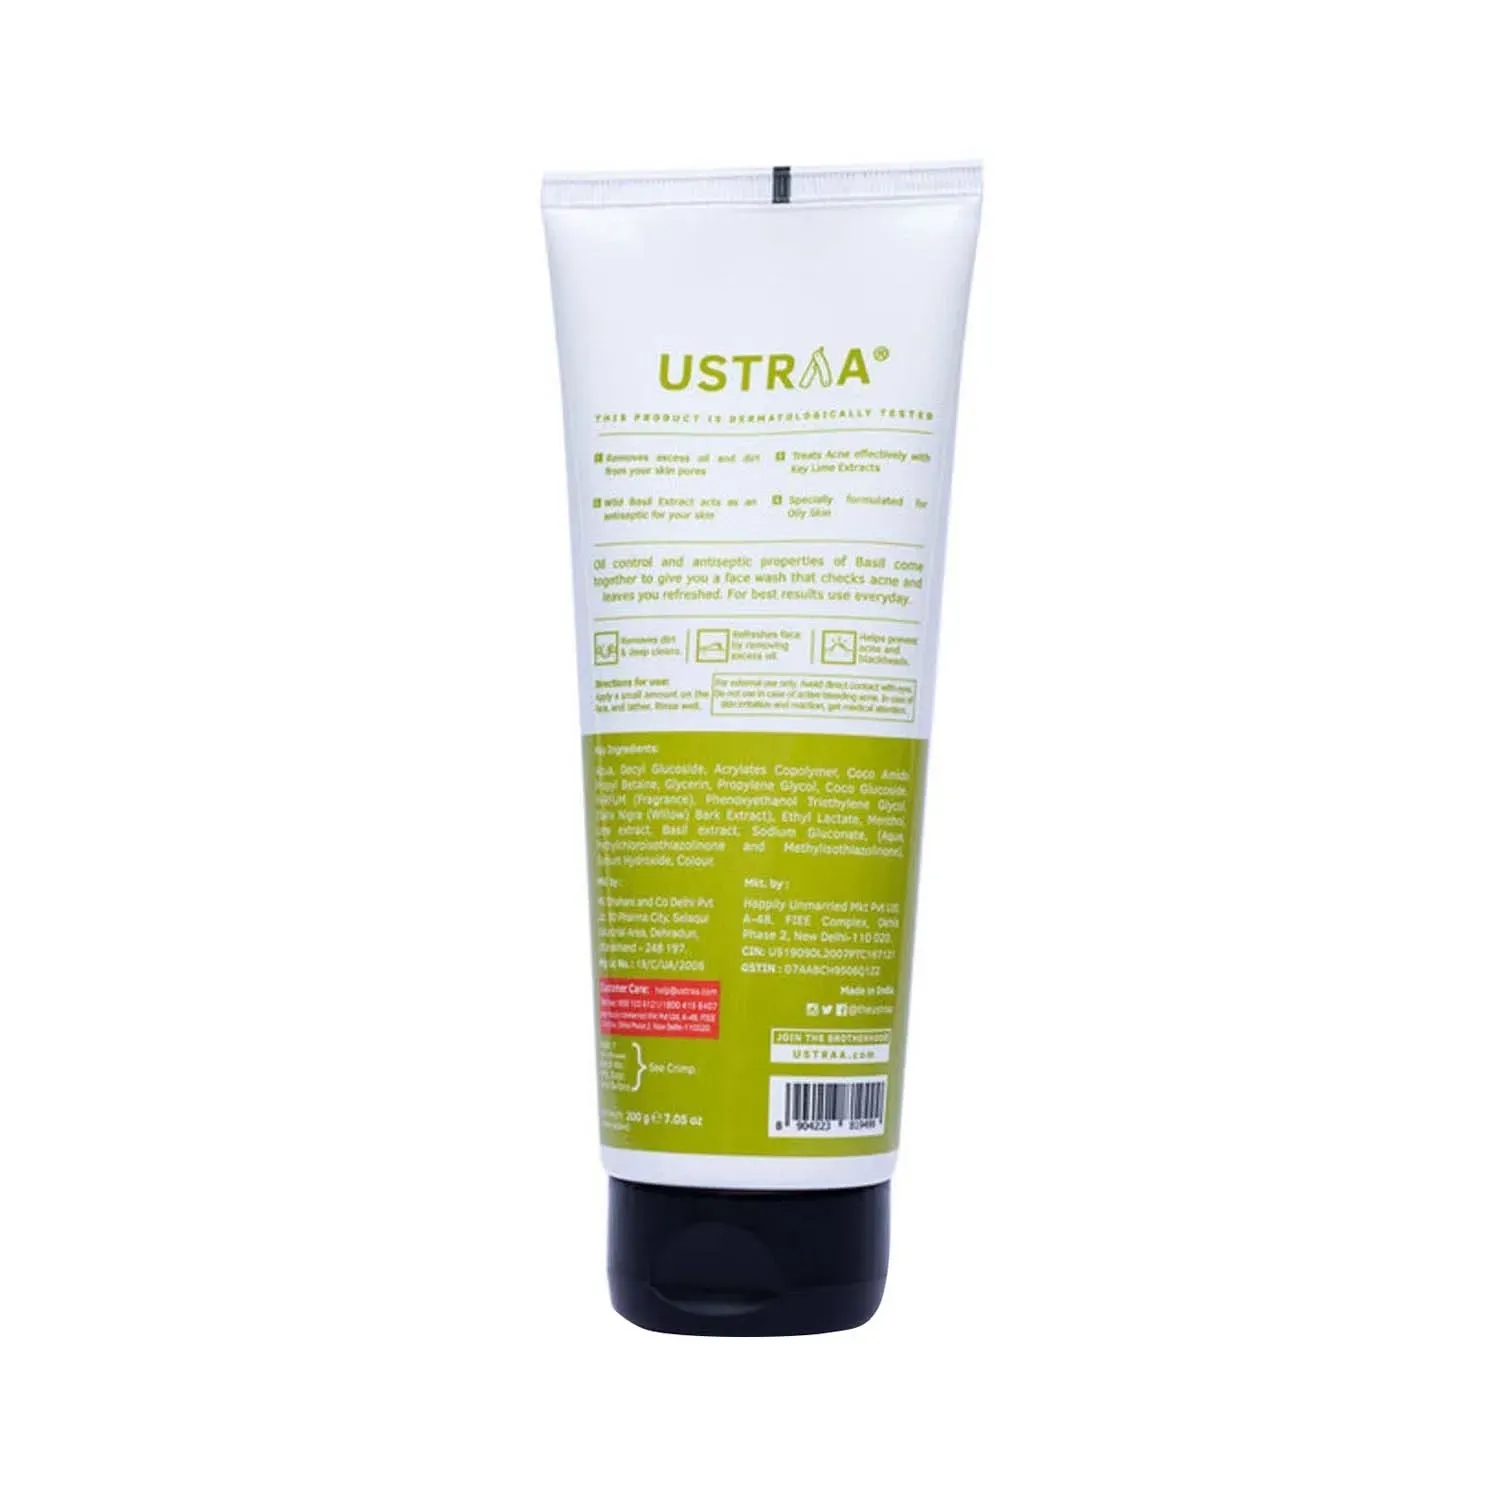 Ustraa Hair Growth Cream 18 Natural Active Ingredients Target Male pattern  Baldness Non-oily For Men: Buy Ustraa Hair Growth Cream 18 Natural Active  Ingredients Target Male pattern Baldness Non-oily For Men Online